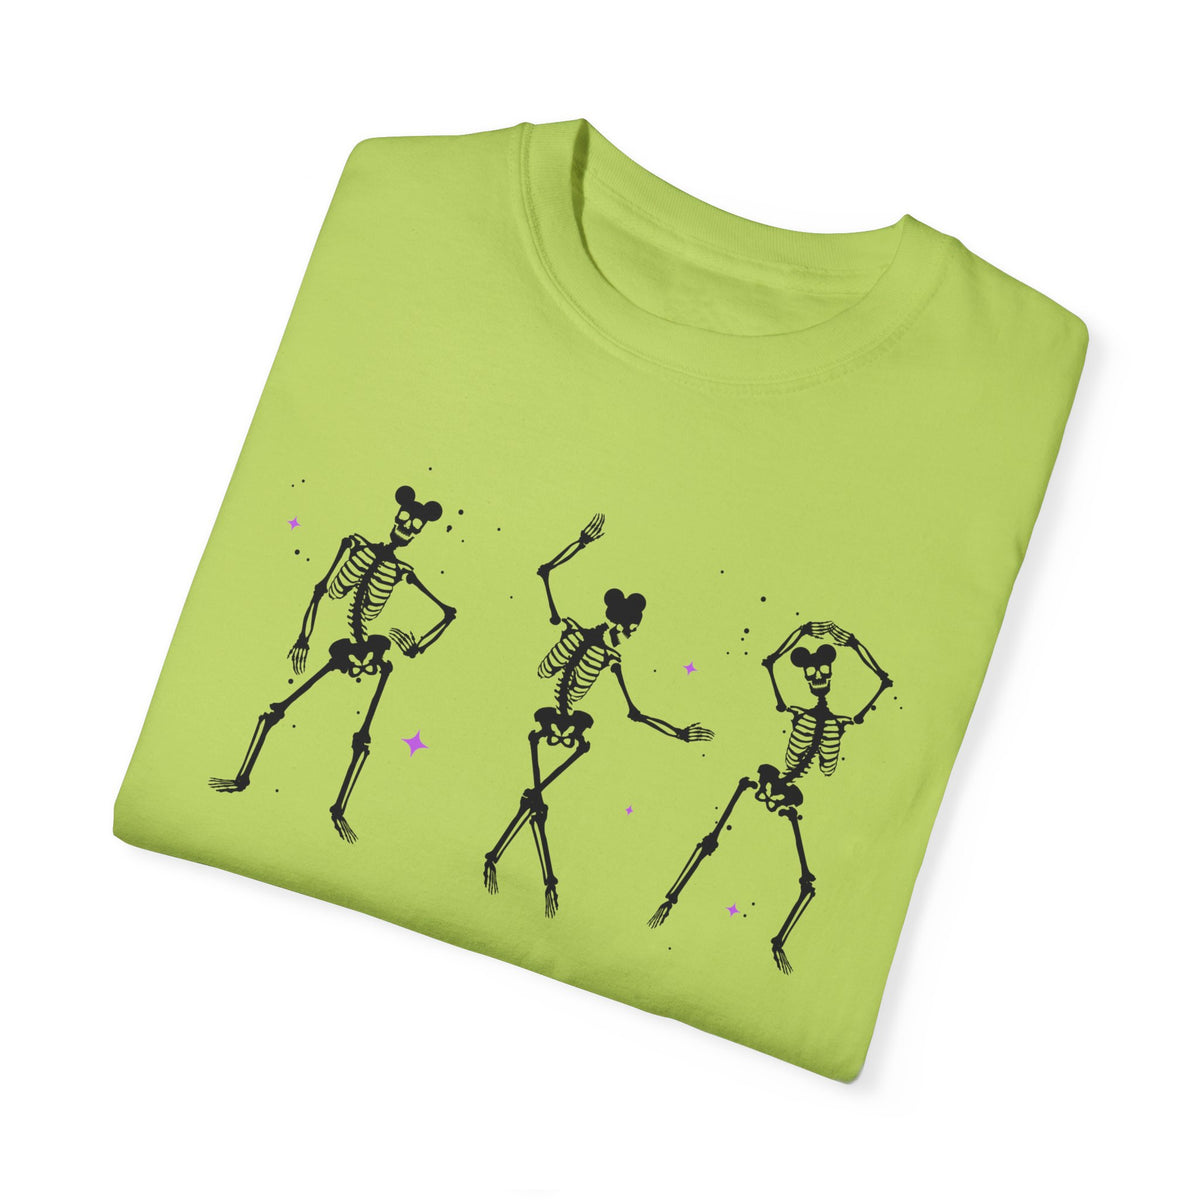 Boo To You Halloween Crew Comfort Colors Unisex Garment-Dyed T-shirt